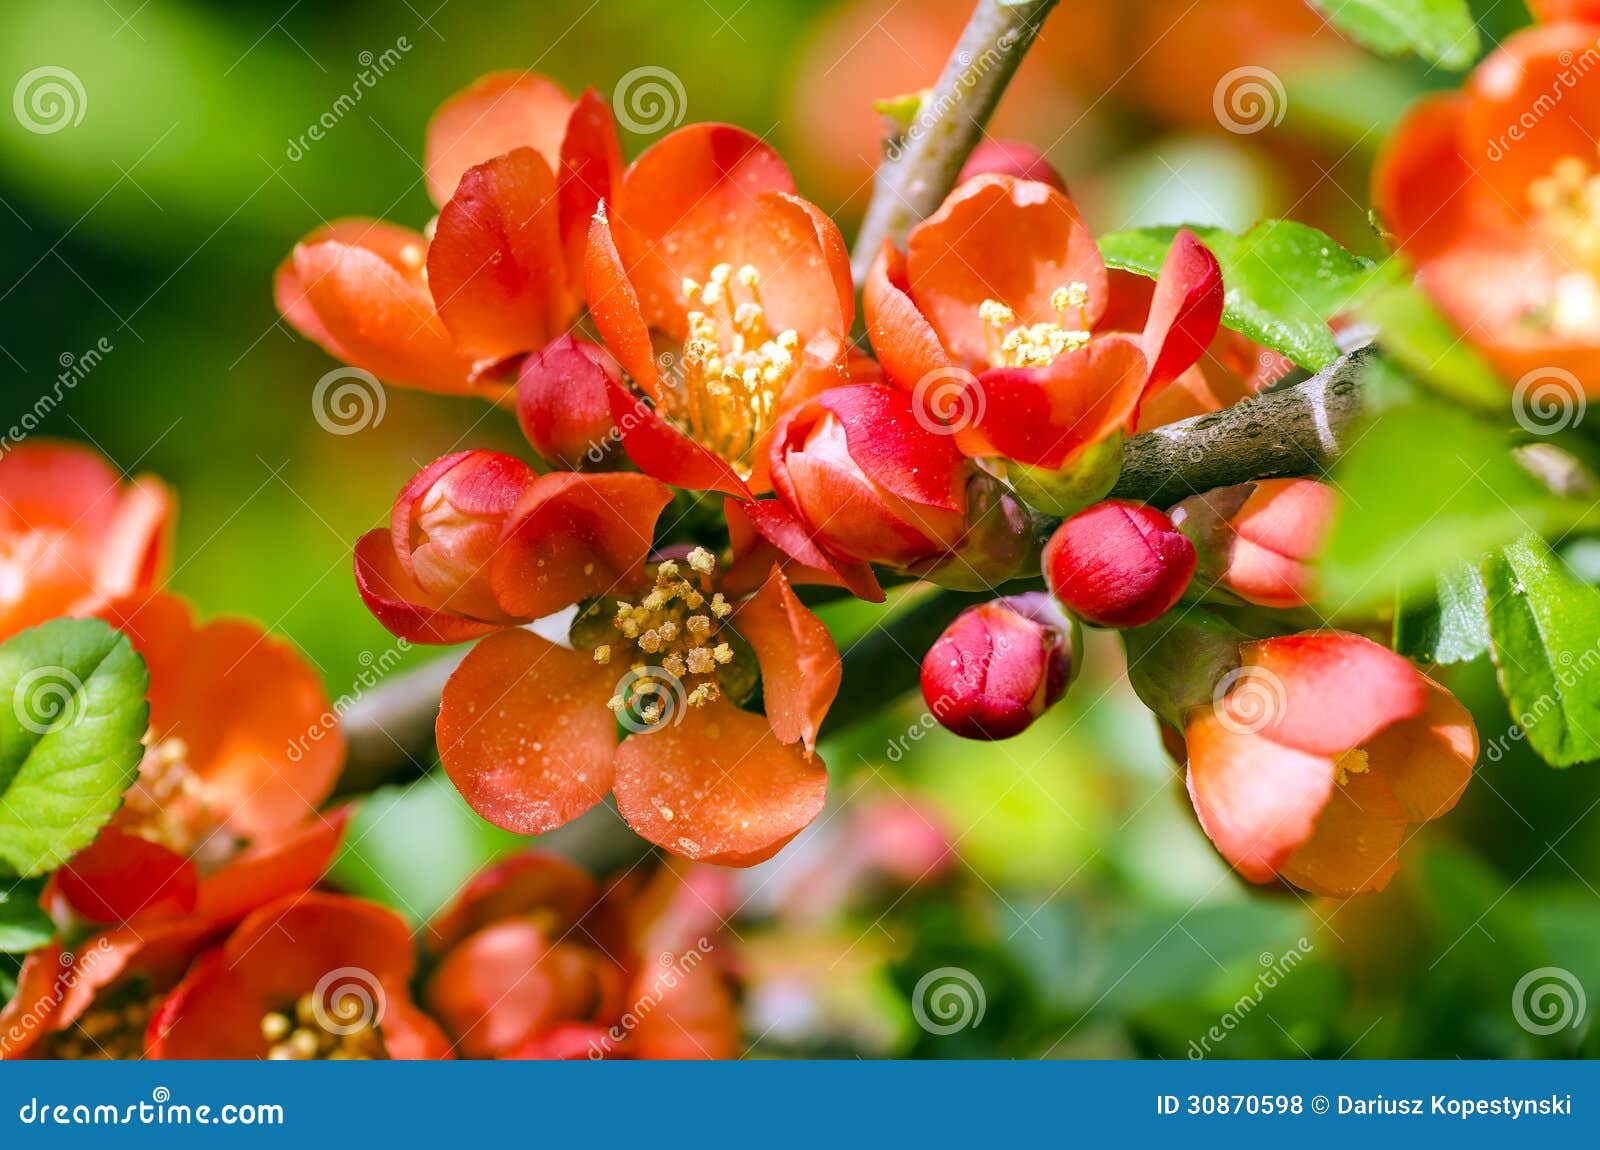 japanese quince tree